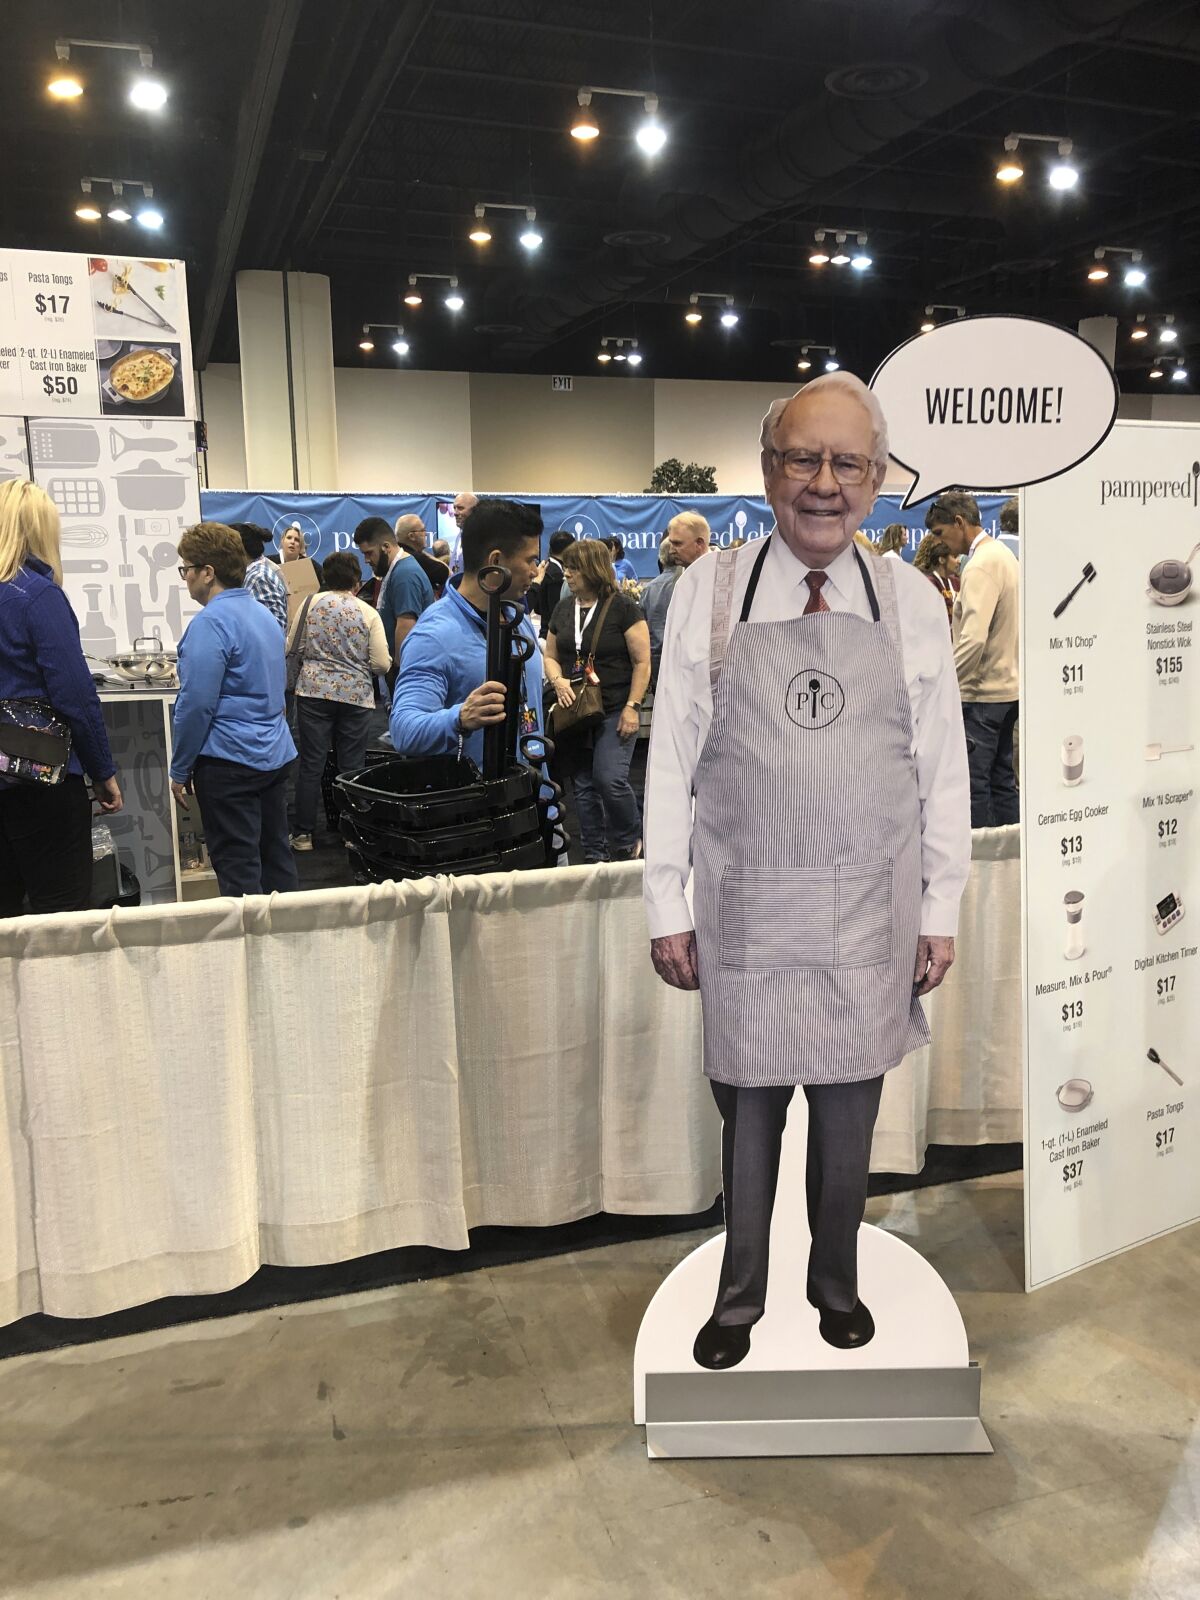 A cutout of Berkshire Hathaway CEO Warren Buffett greets shareholders at the Pampered Chef booth at the company's annual meeting, Friday, APril 29, 2022, in Omaha, Neb.. Tens of thousands of shareholders are expected Saturday to attend the company's first in-person meeting since the pandemic began. (AP Photo/Josh Funk)